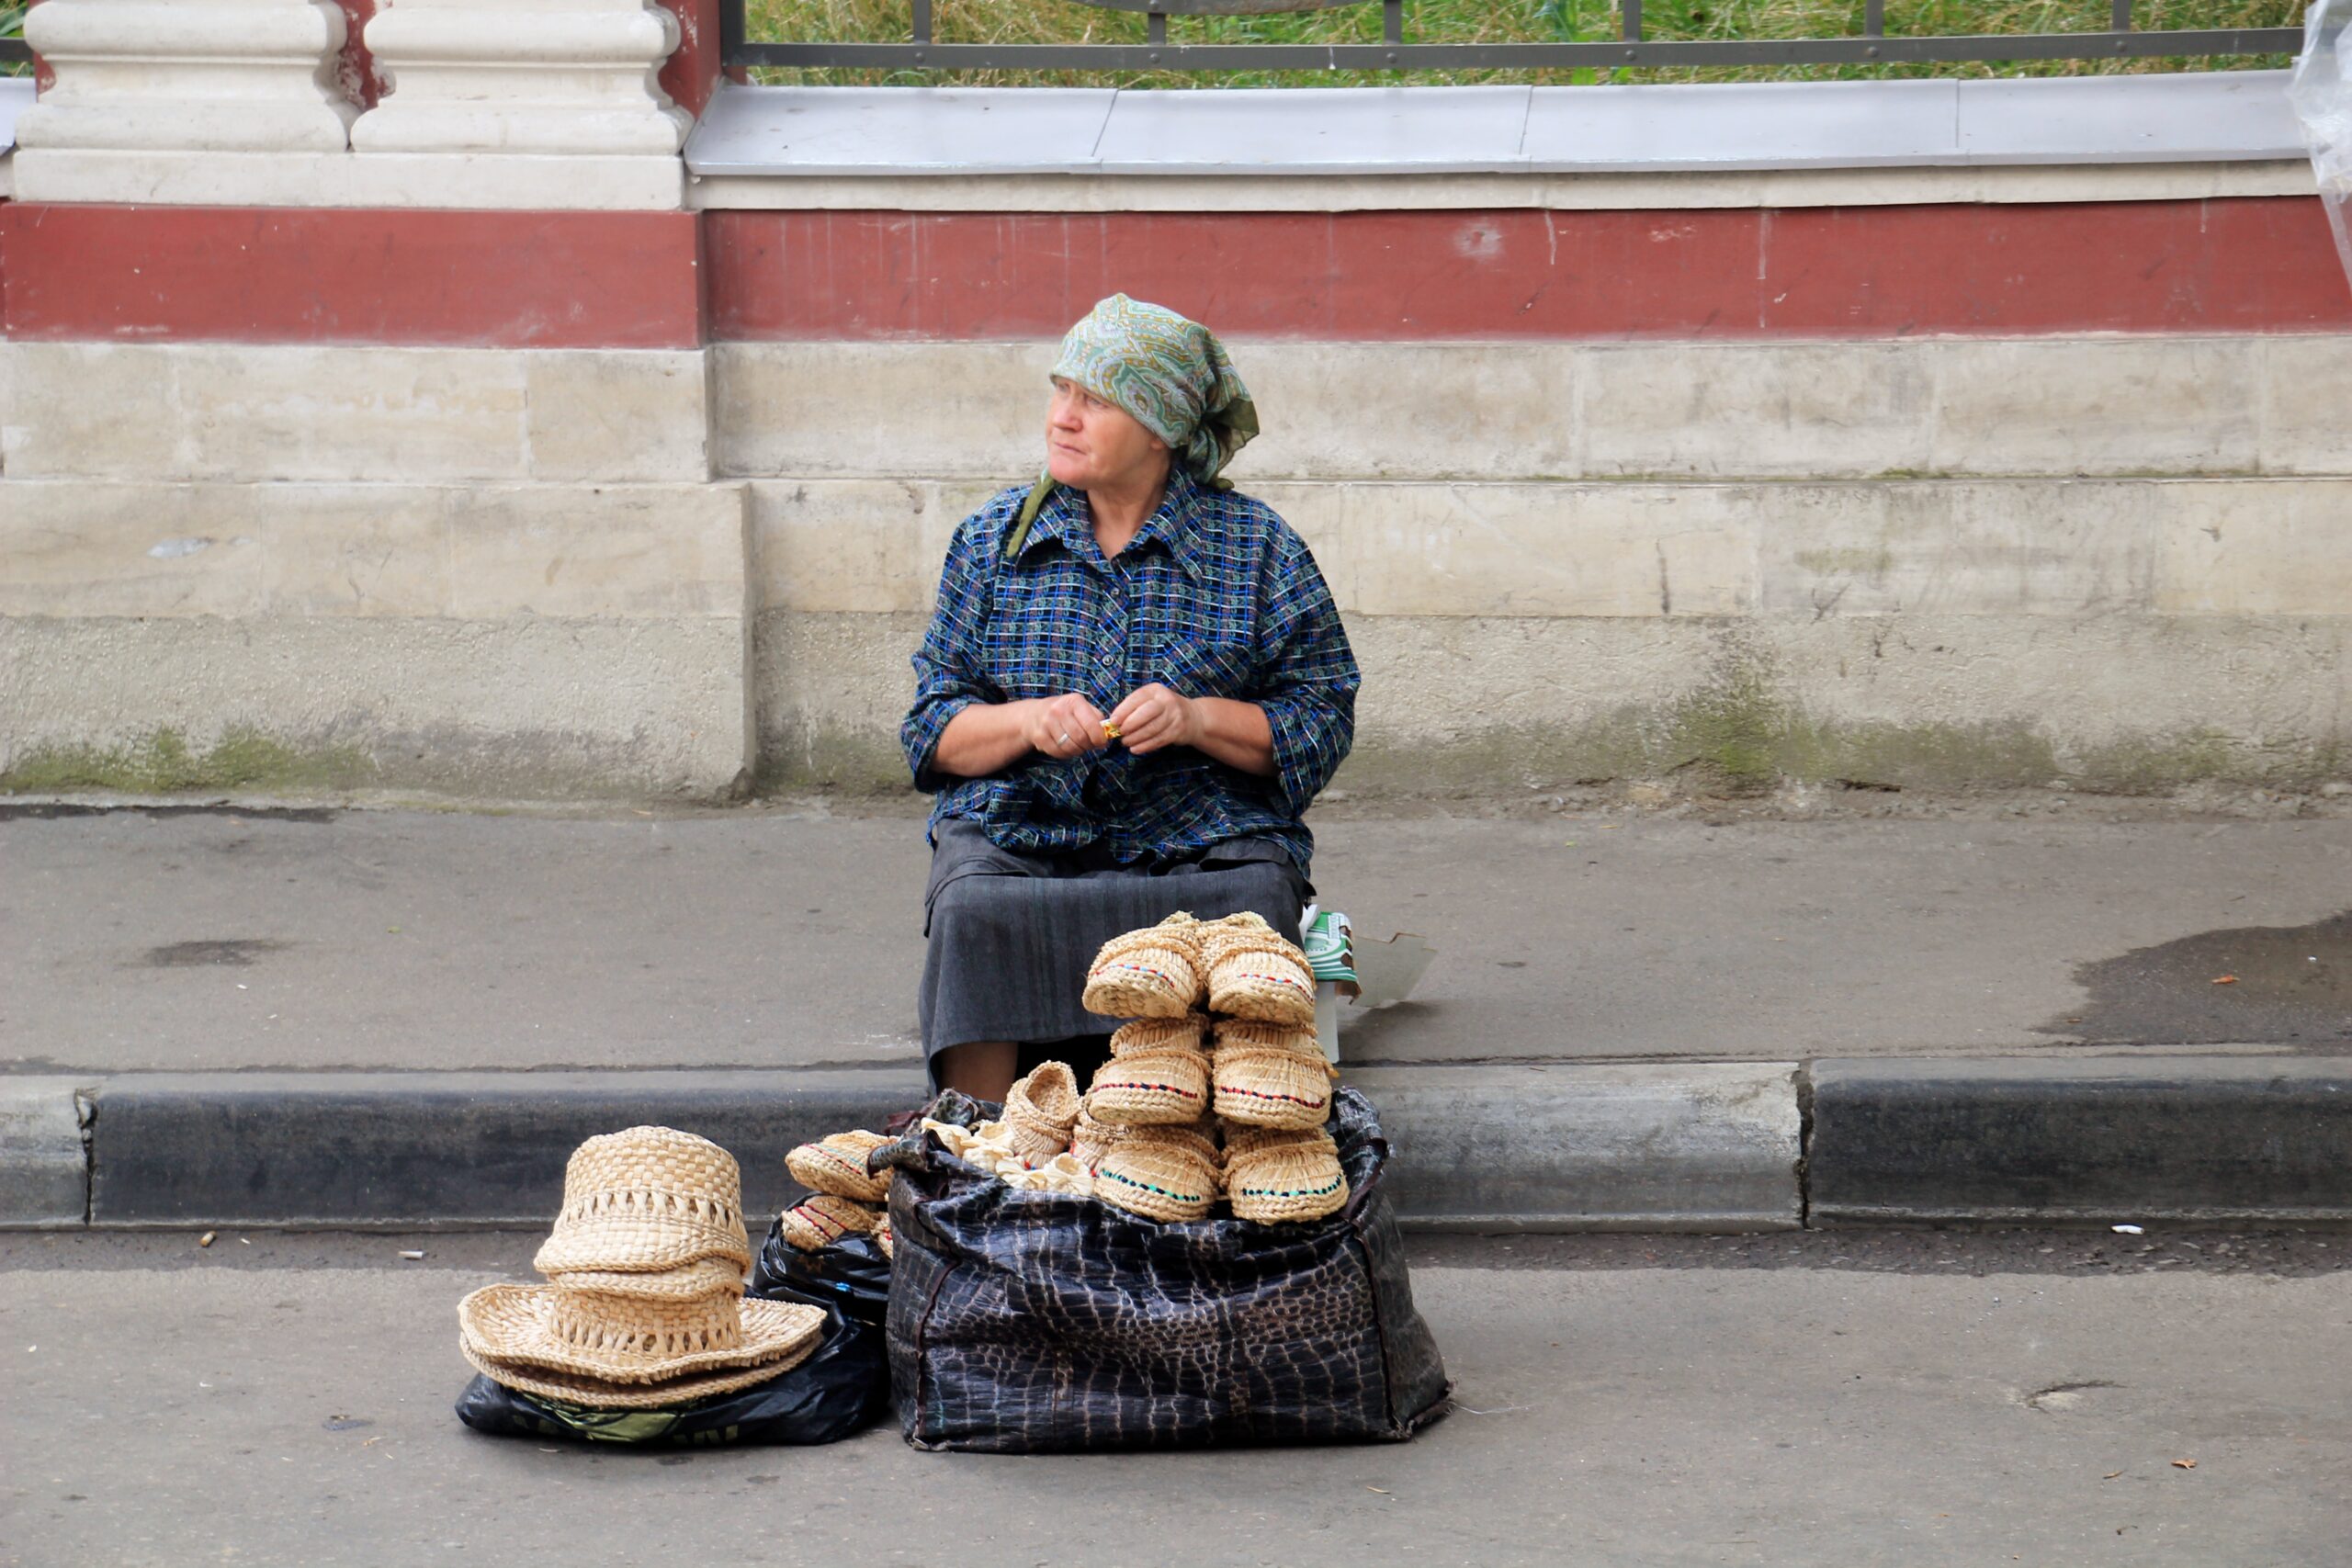 A Russian woman sells hats and shoes on a Moscow sidewalk.